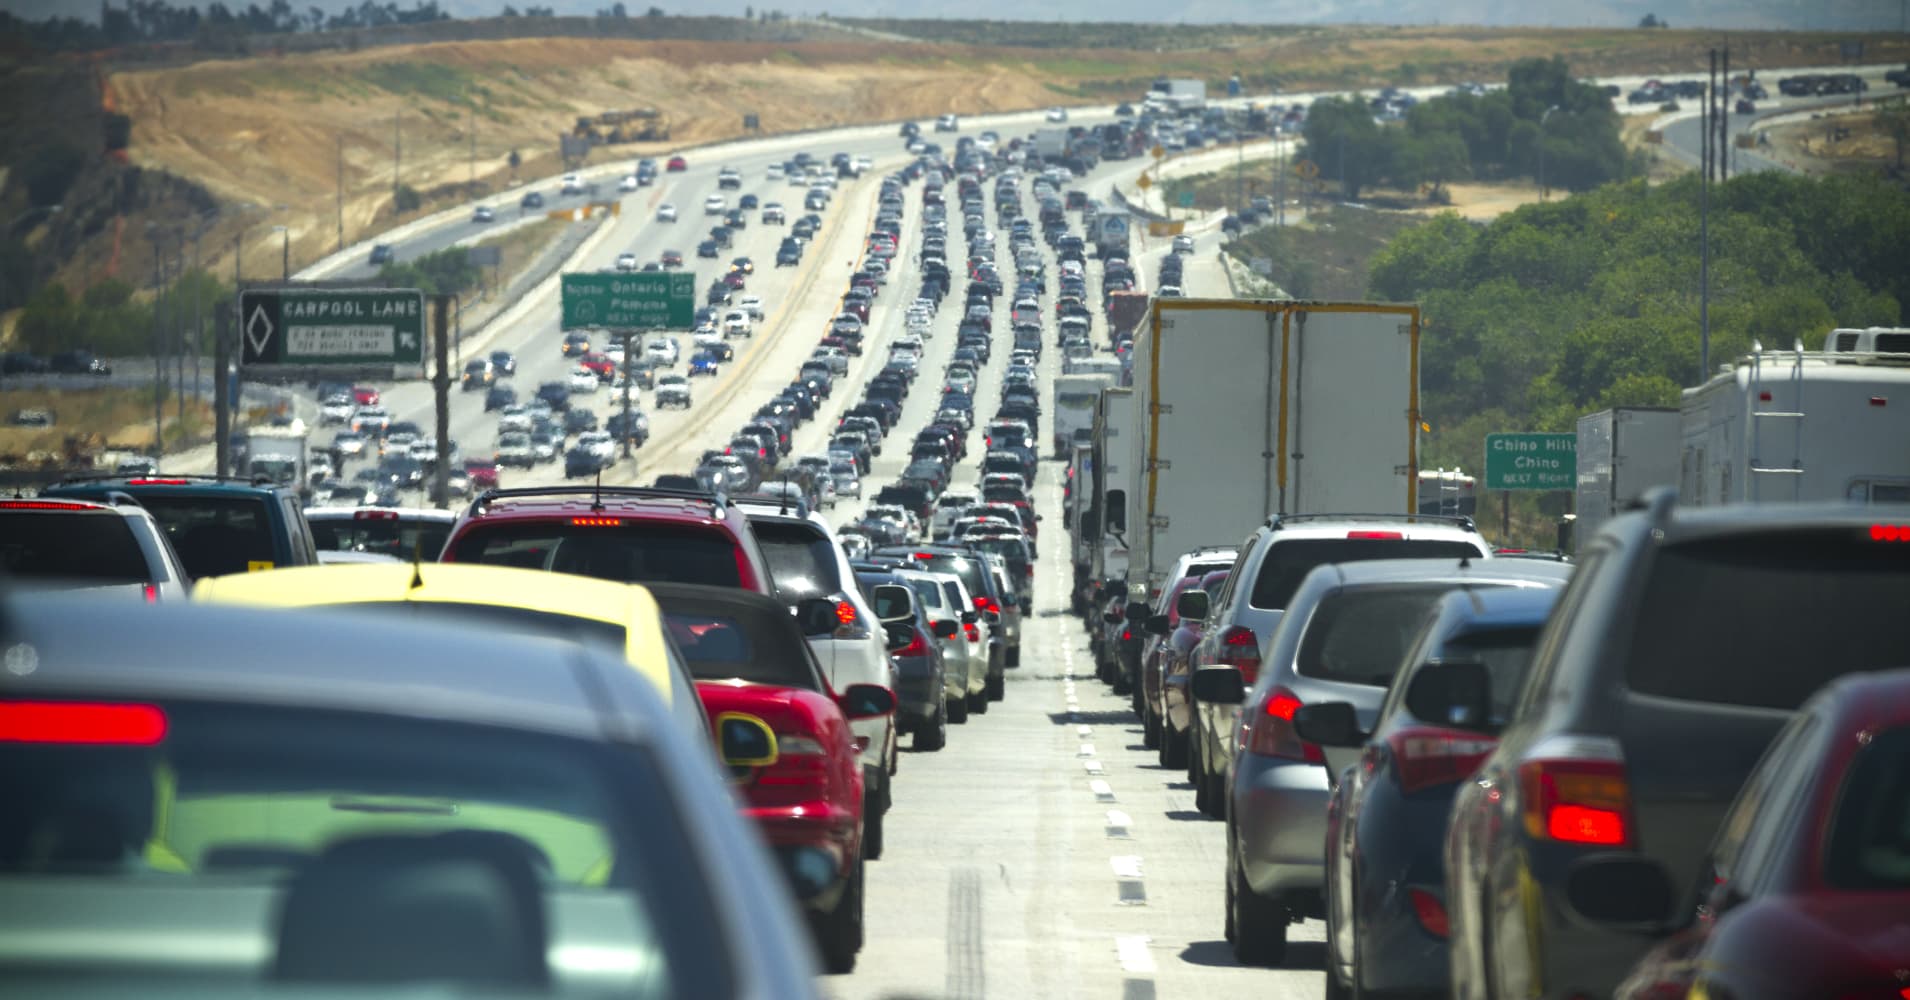 Traffic on an Interstate freeway in Southern California